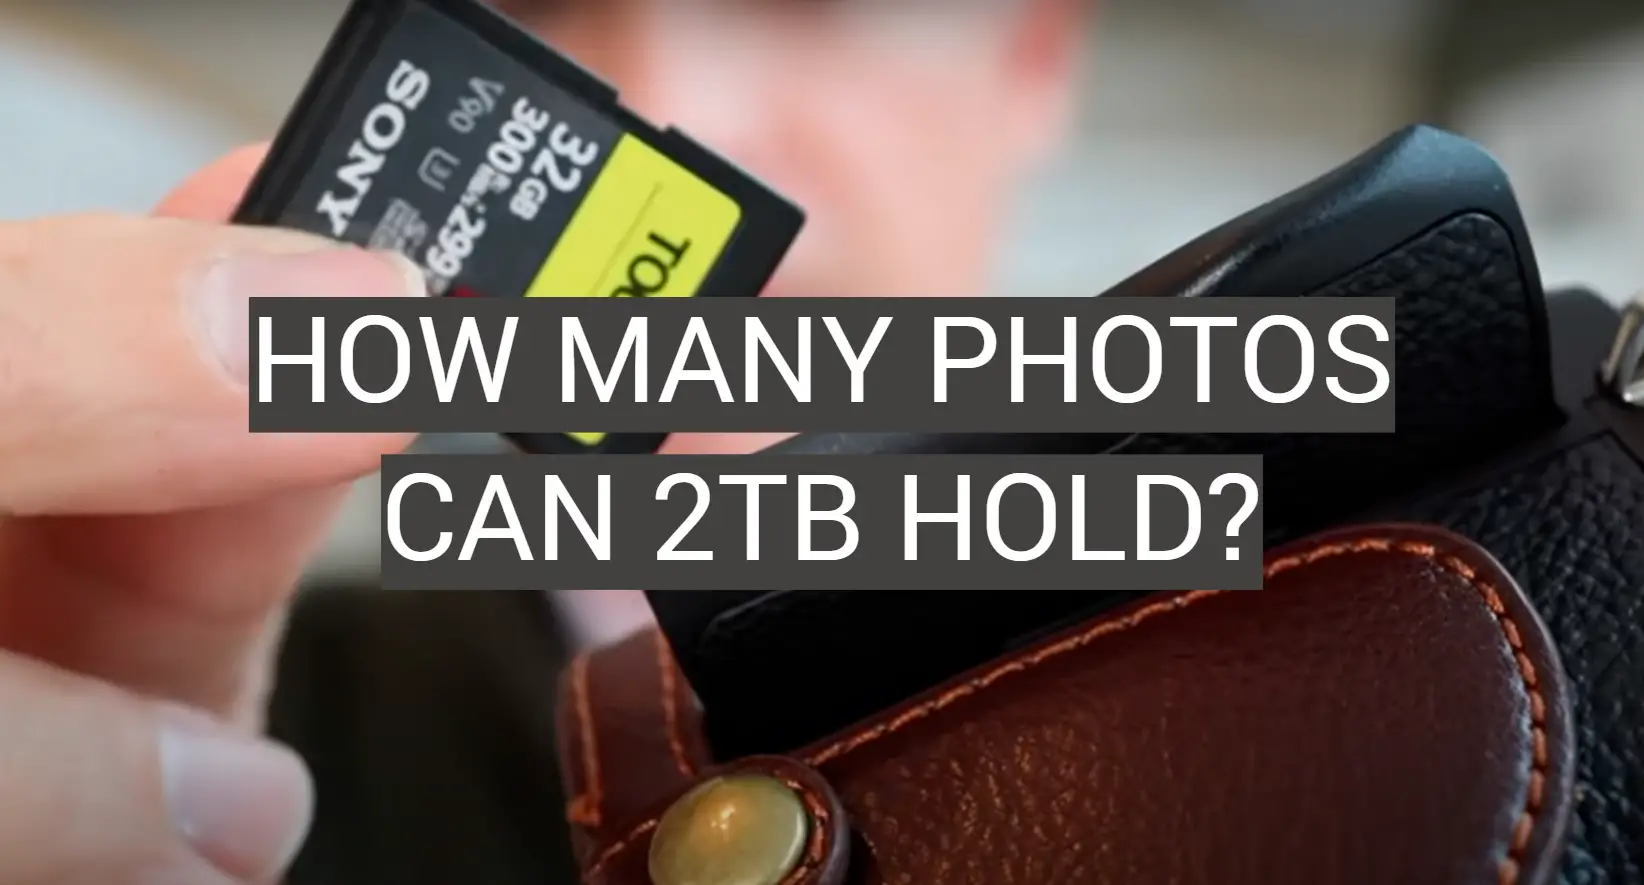 How Many Photos Can 2TB Hold?